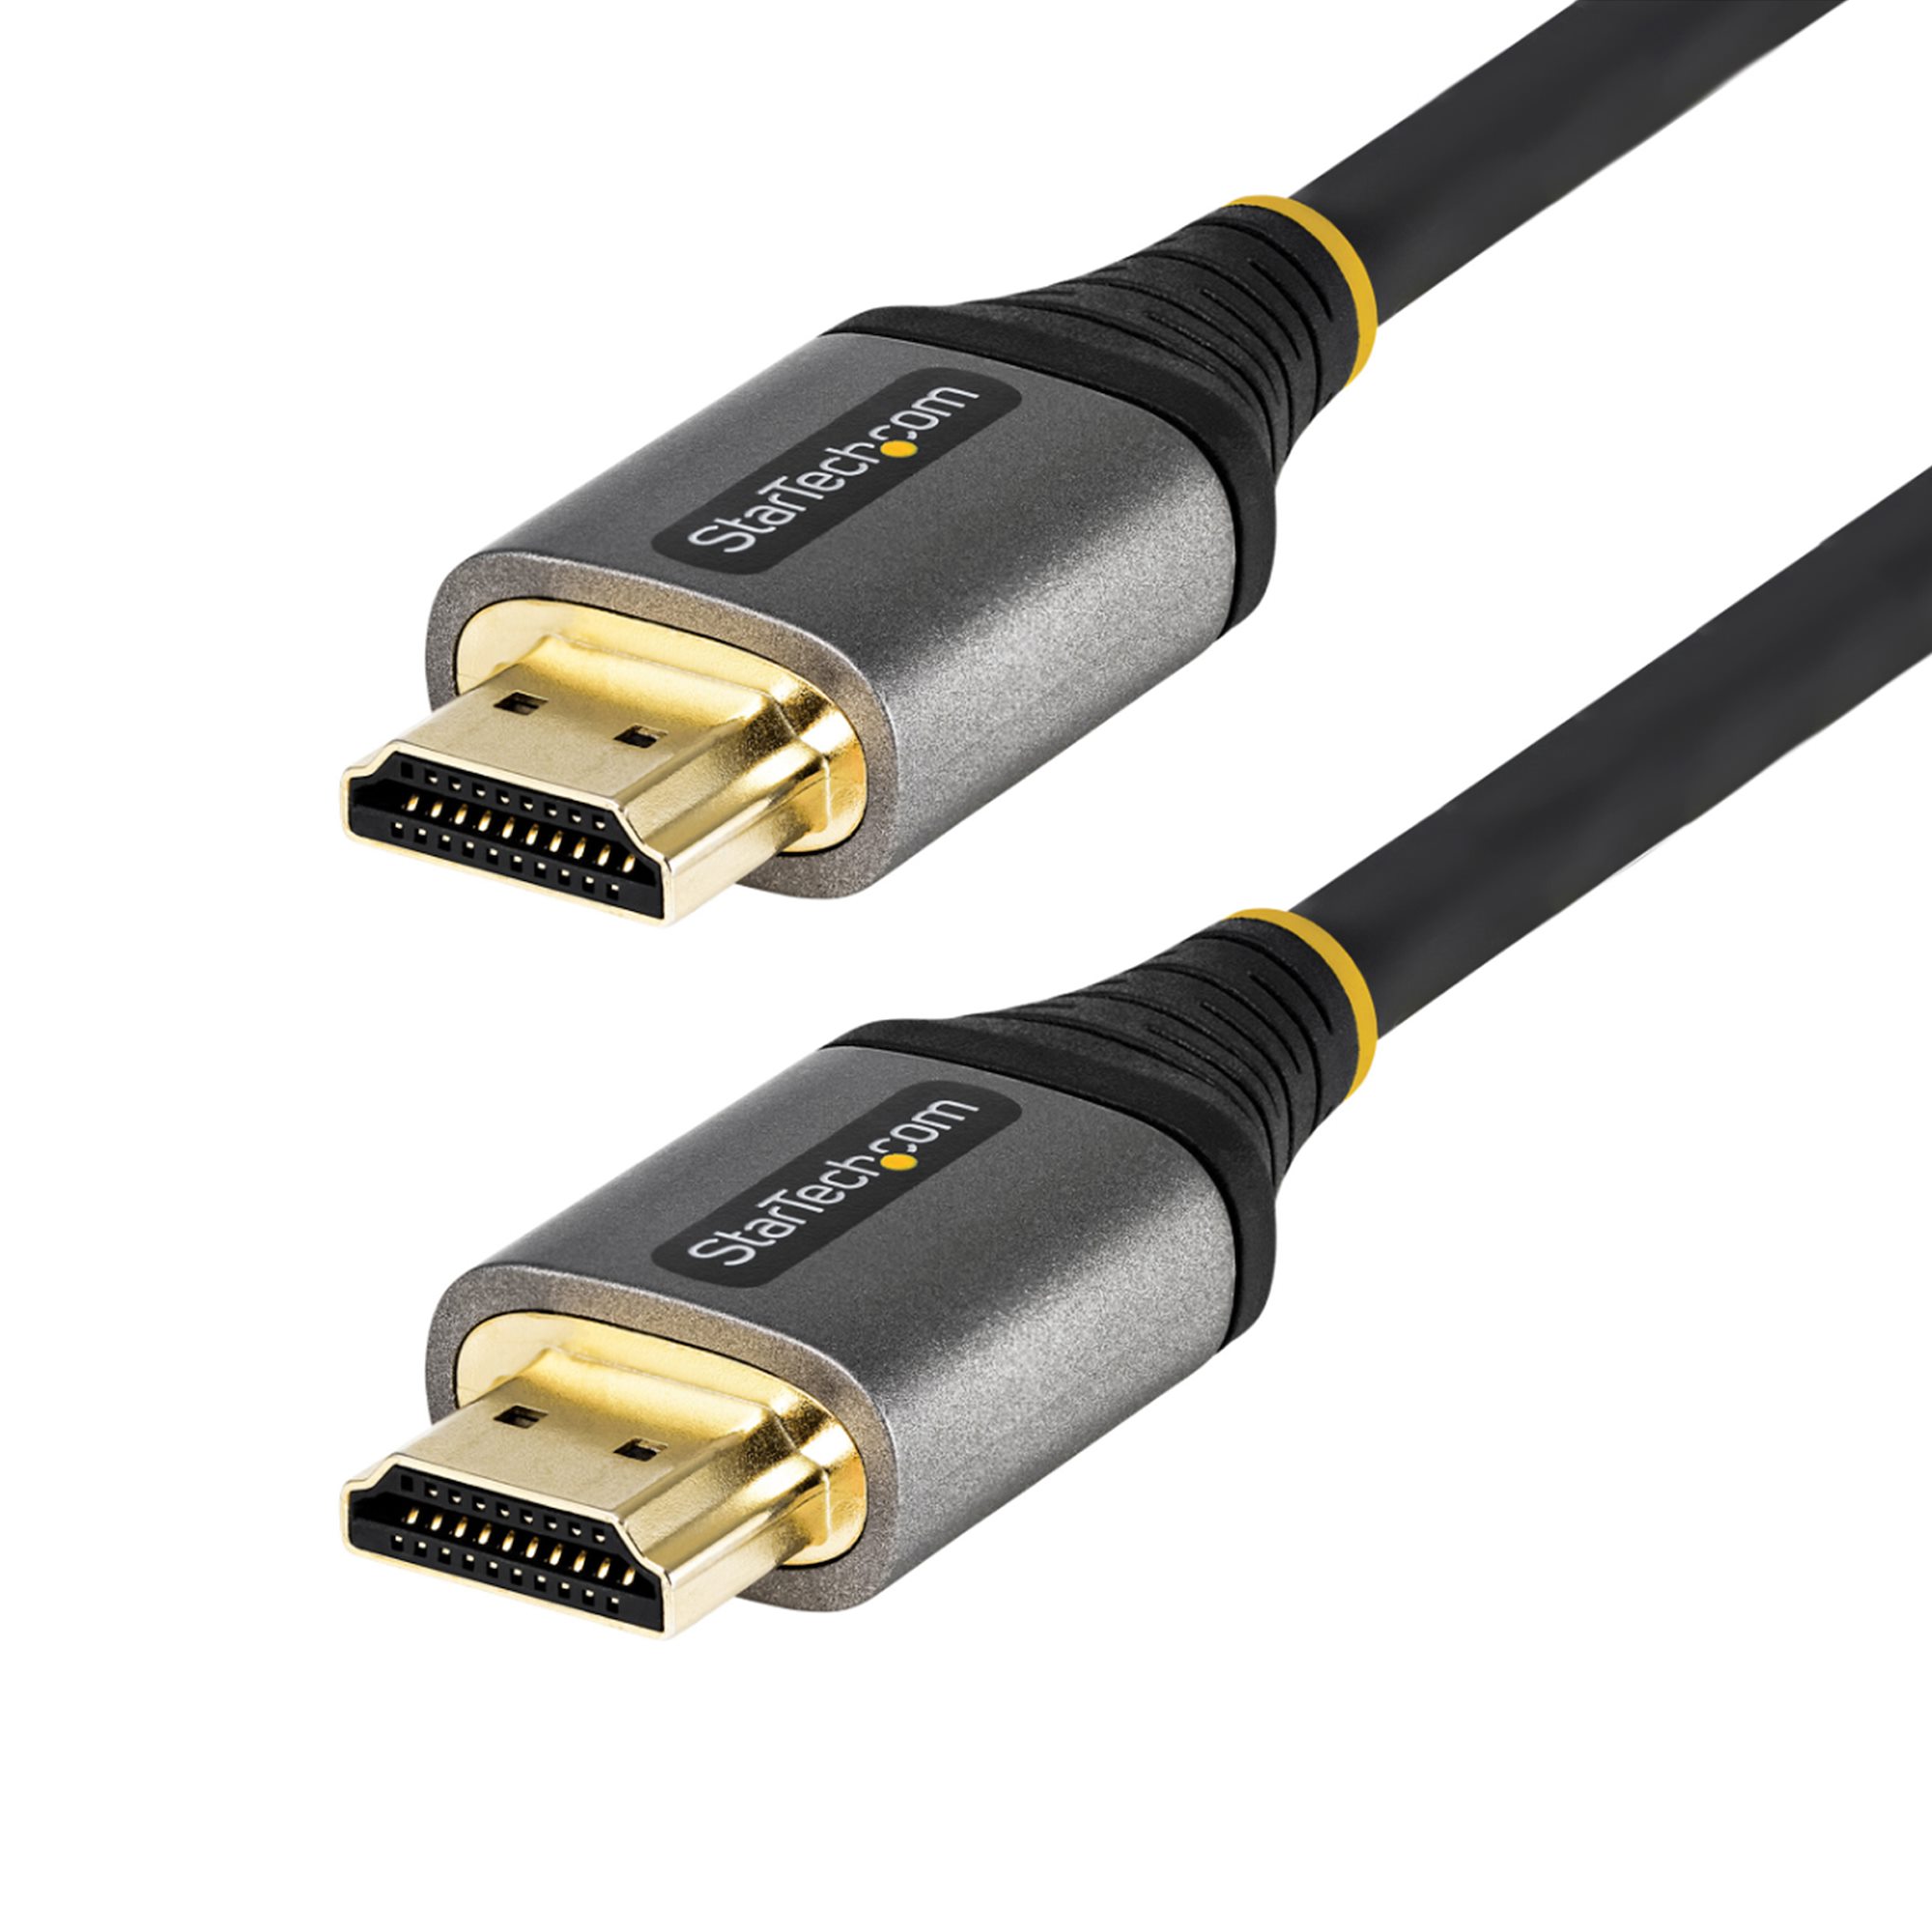  USB to HDMI Charging Cord Cable 1.6FT, USB 2.0 Male to